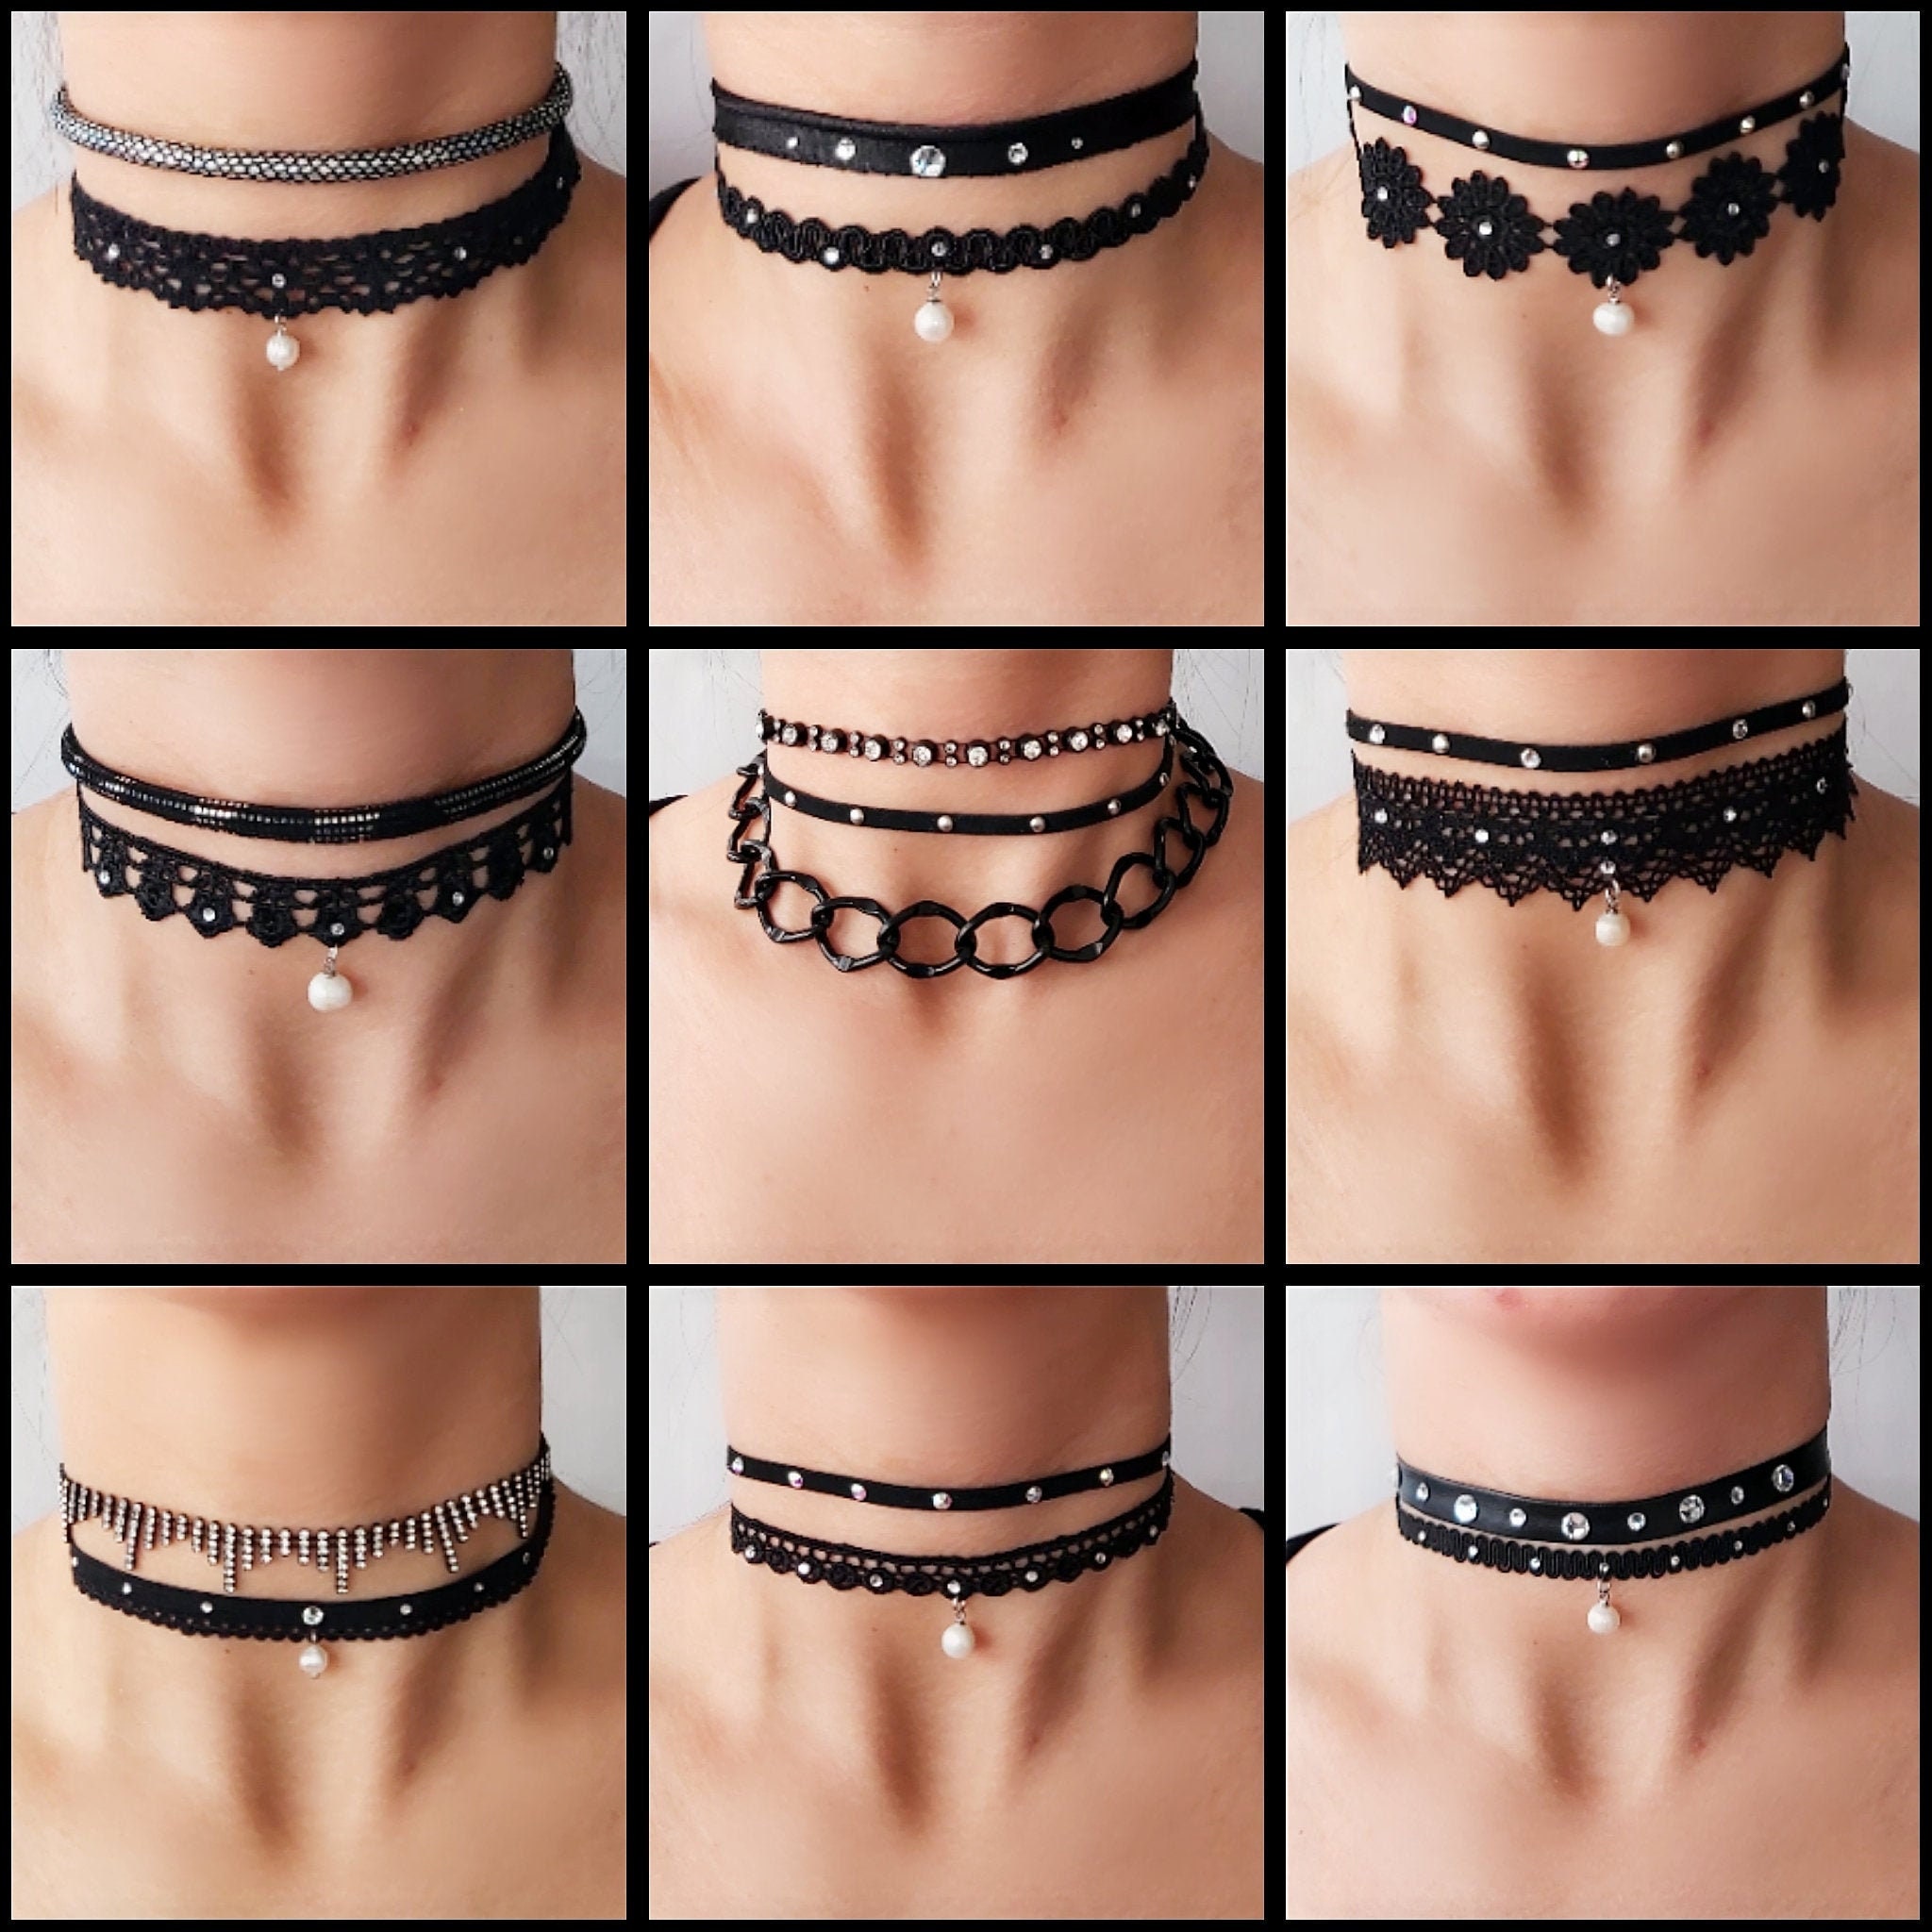 Women Adjustable Gothic Lace Necklace Bouncy Girls Gothic Lace Choker Necklace Black for Ladies Black Choker Necklaces Set 16 Pcs Tattoo Choker Necklace Black Classic Gothic Choker 